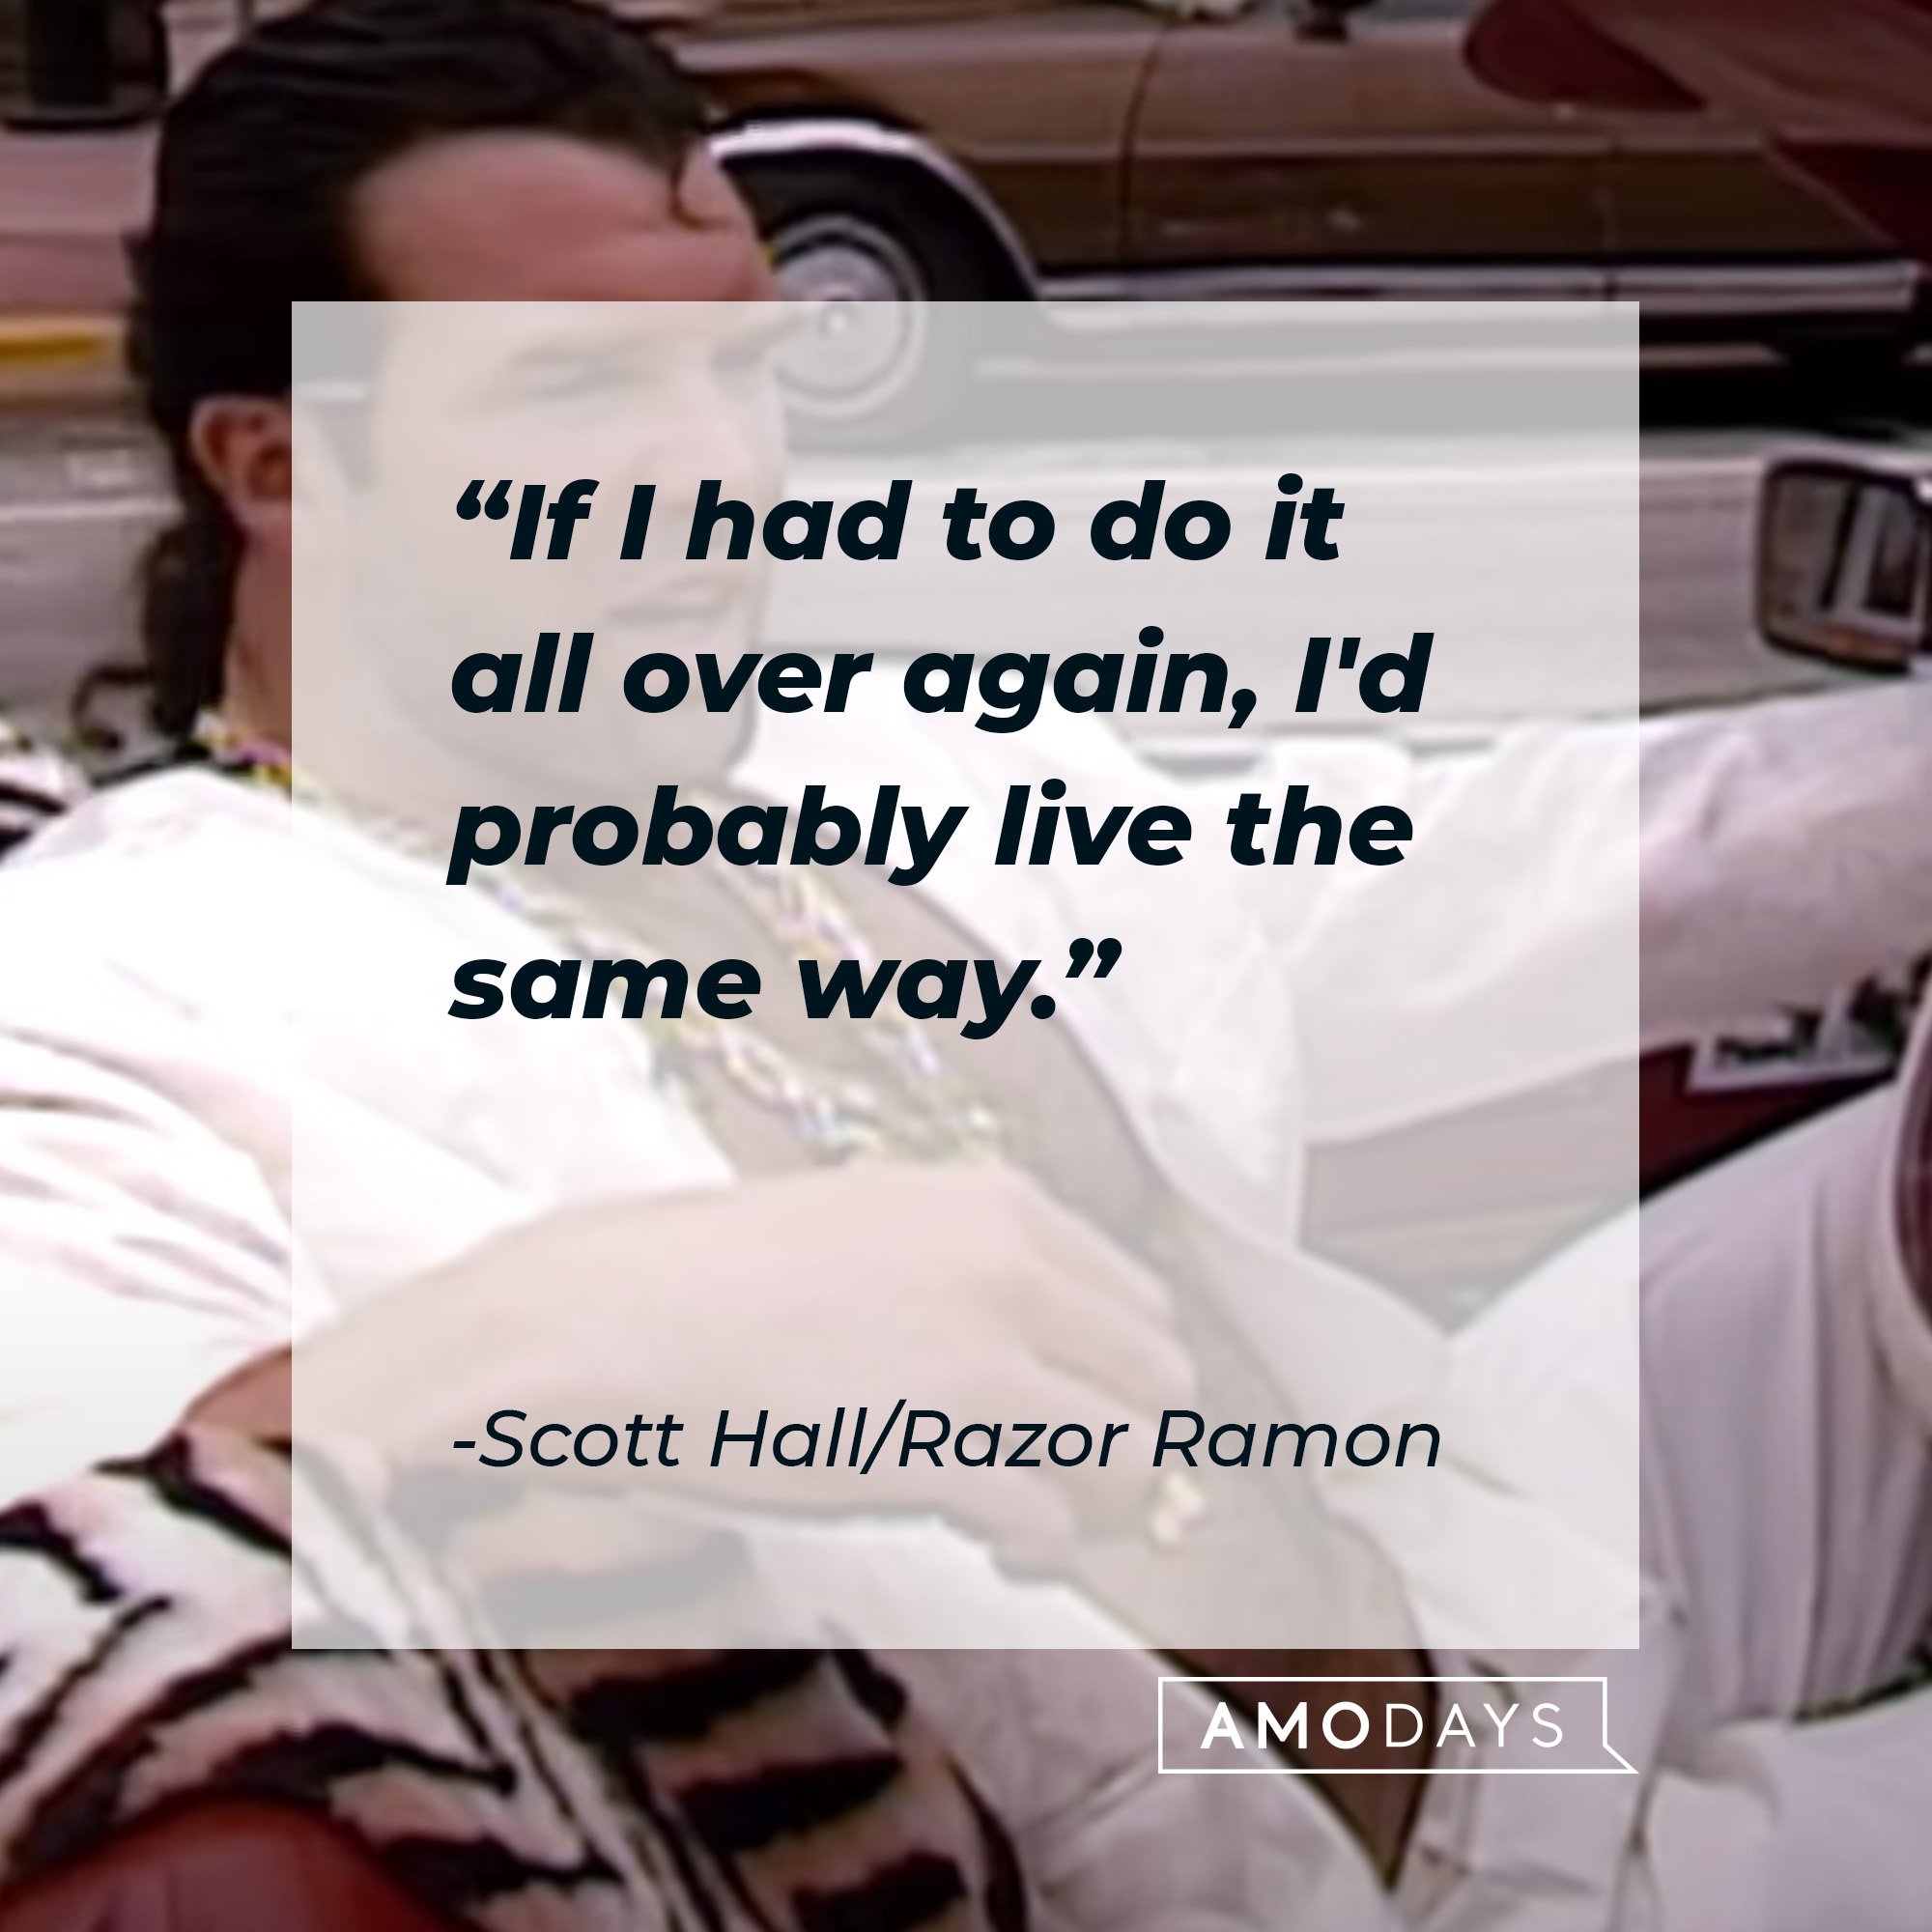 Scott Hall/Razor Ramon’s quote: "If I had to do it all over again, I'd probably live the same way.”  | Image: AmoDays